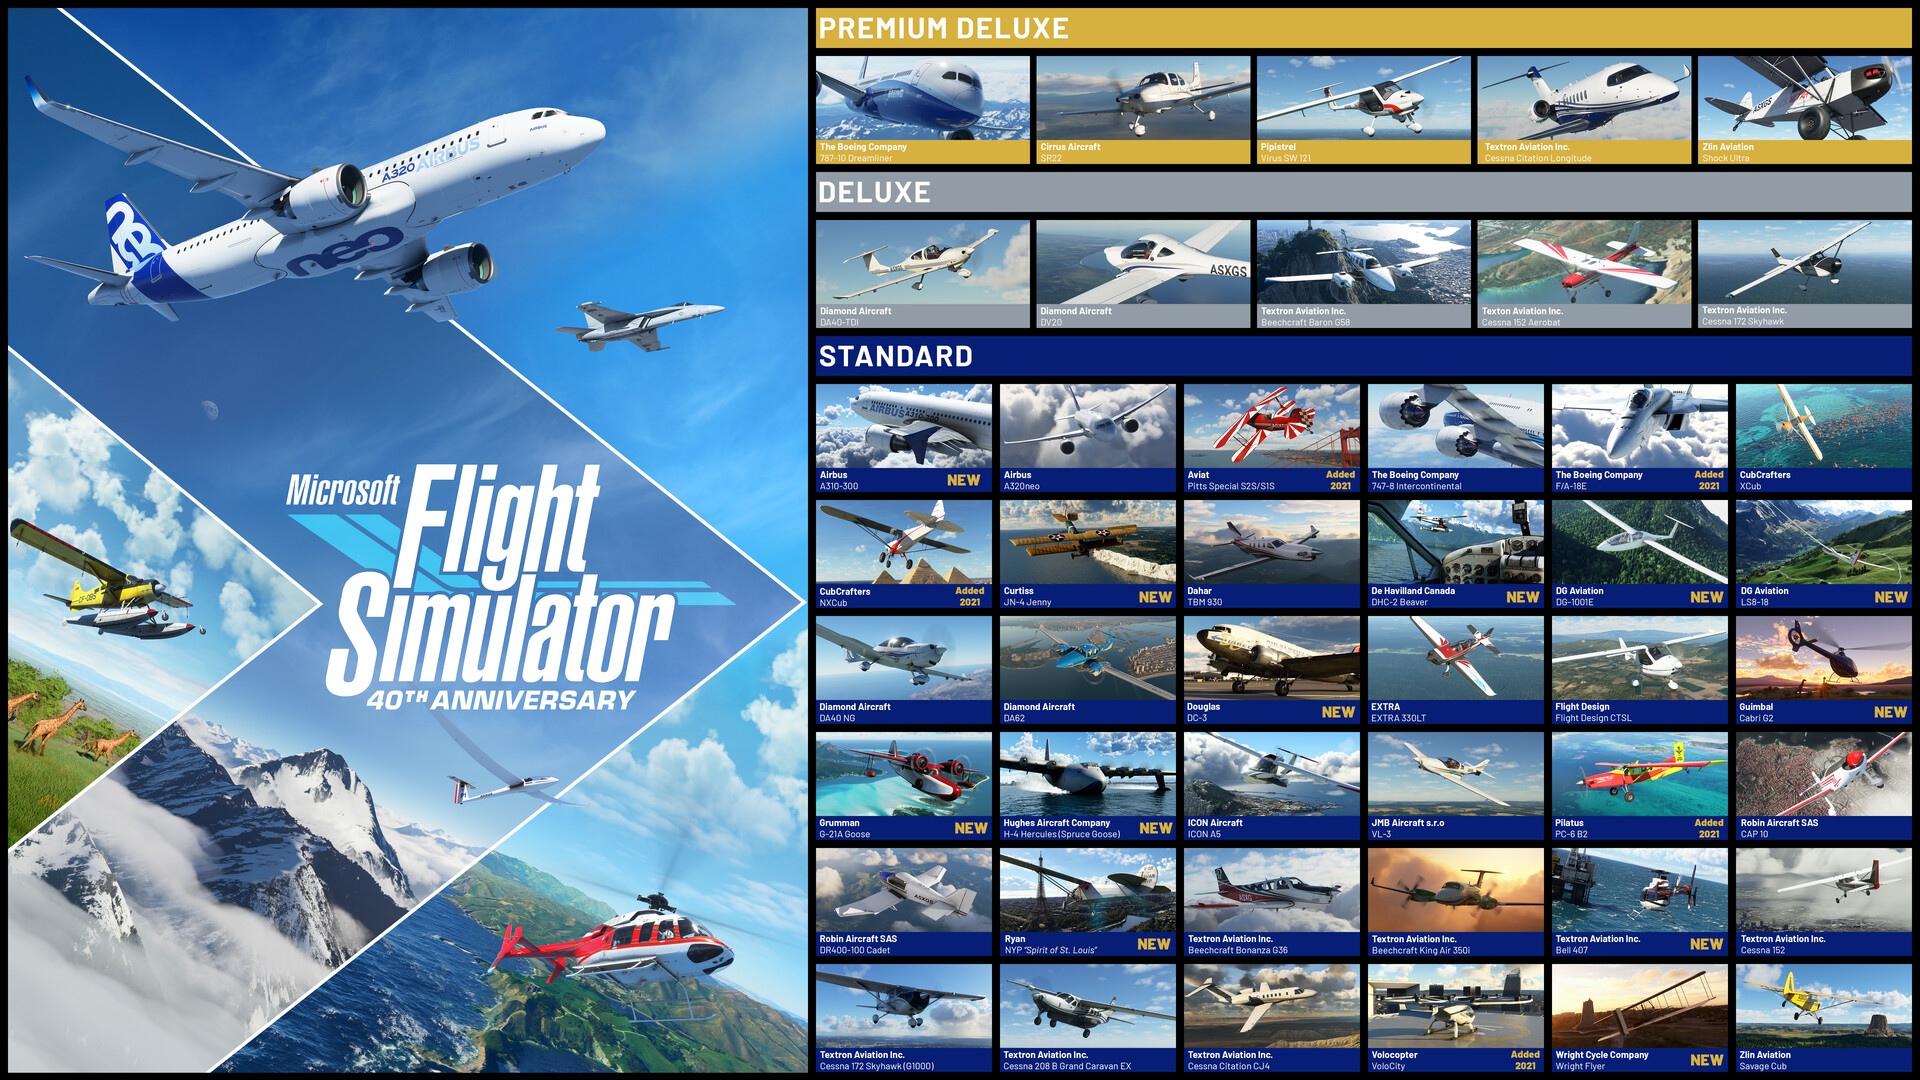 Find the best laptops for Microsoft Flight Simulator 40th Anniversary Edition